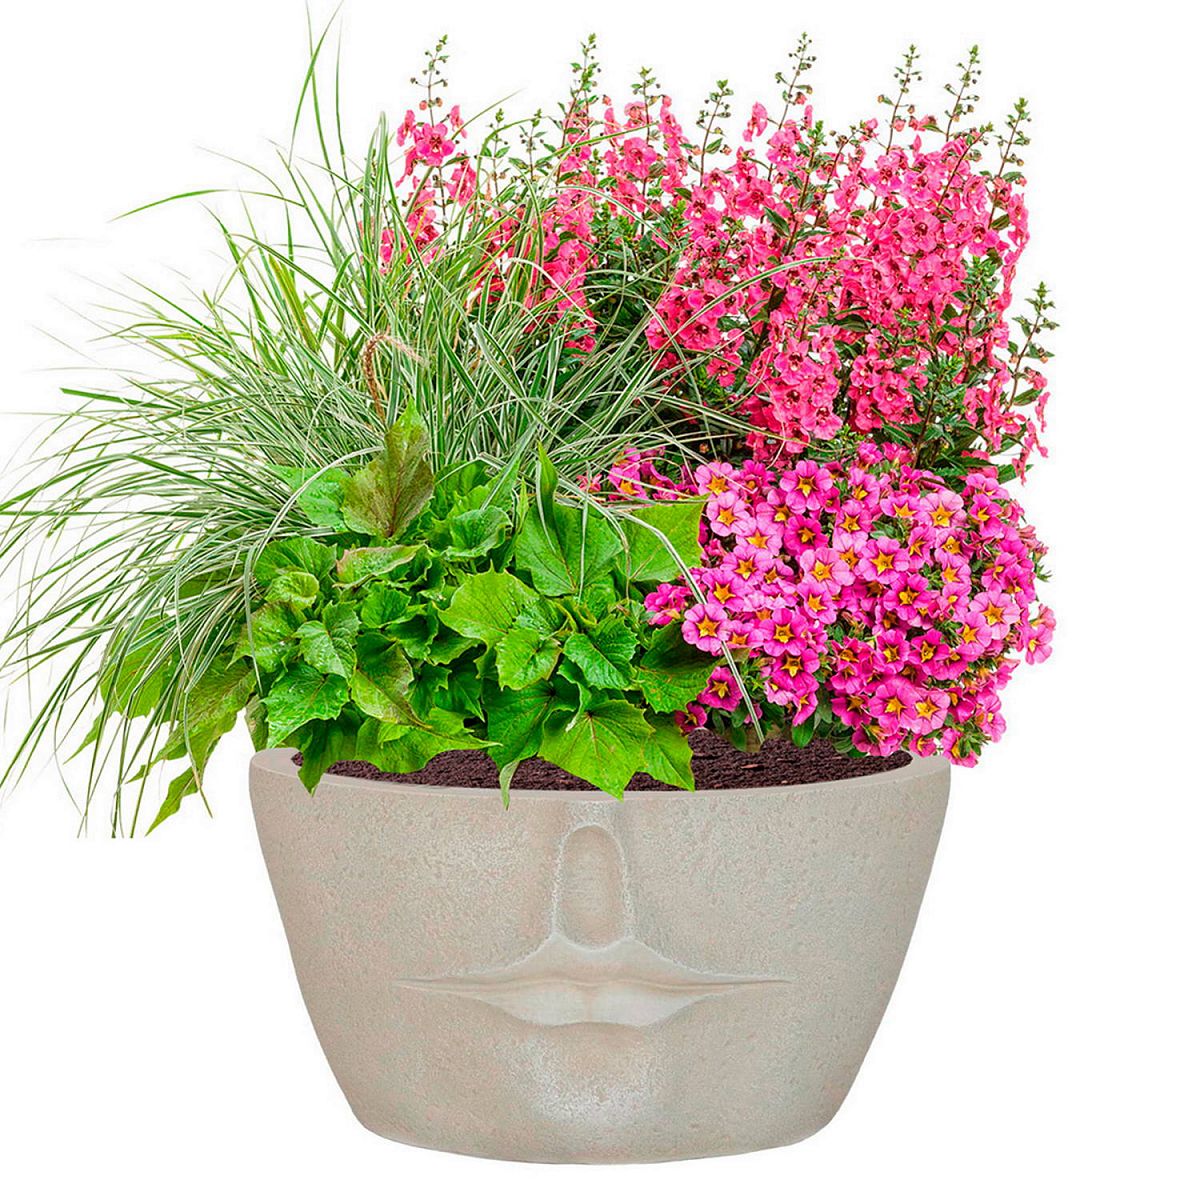 Textured Concrete Effect Oval Outdoor Head Planter with Lips by Idealist Lite